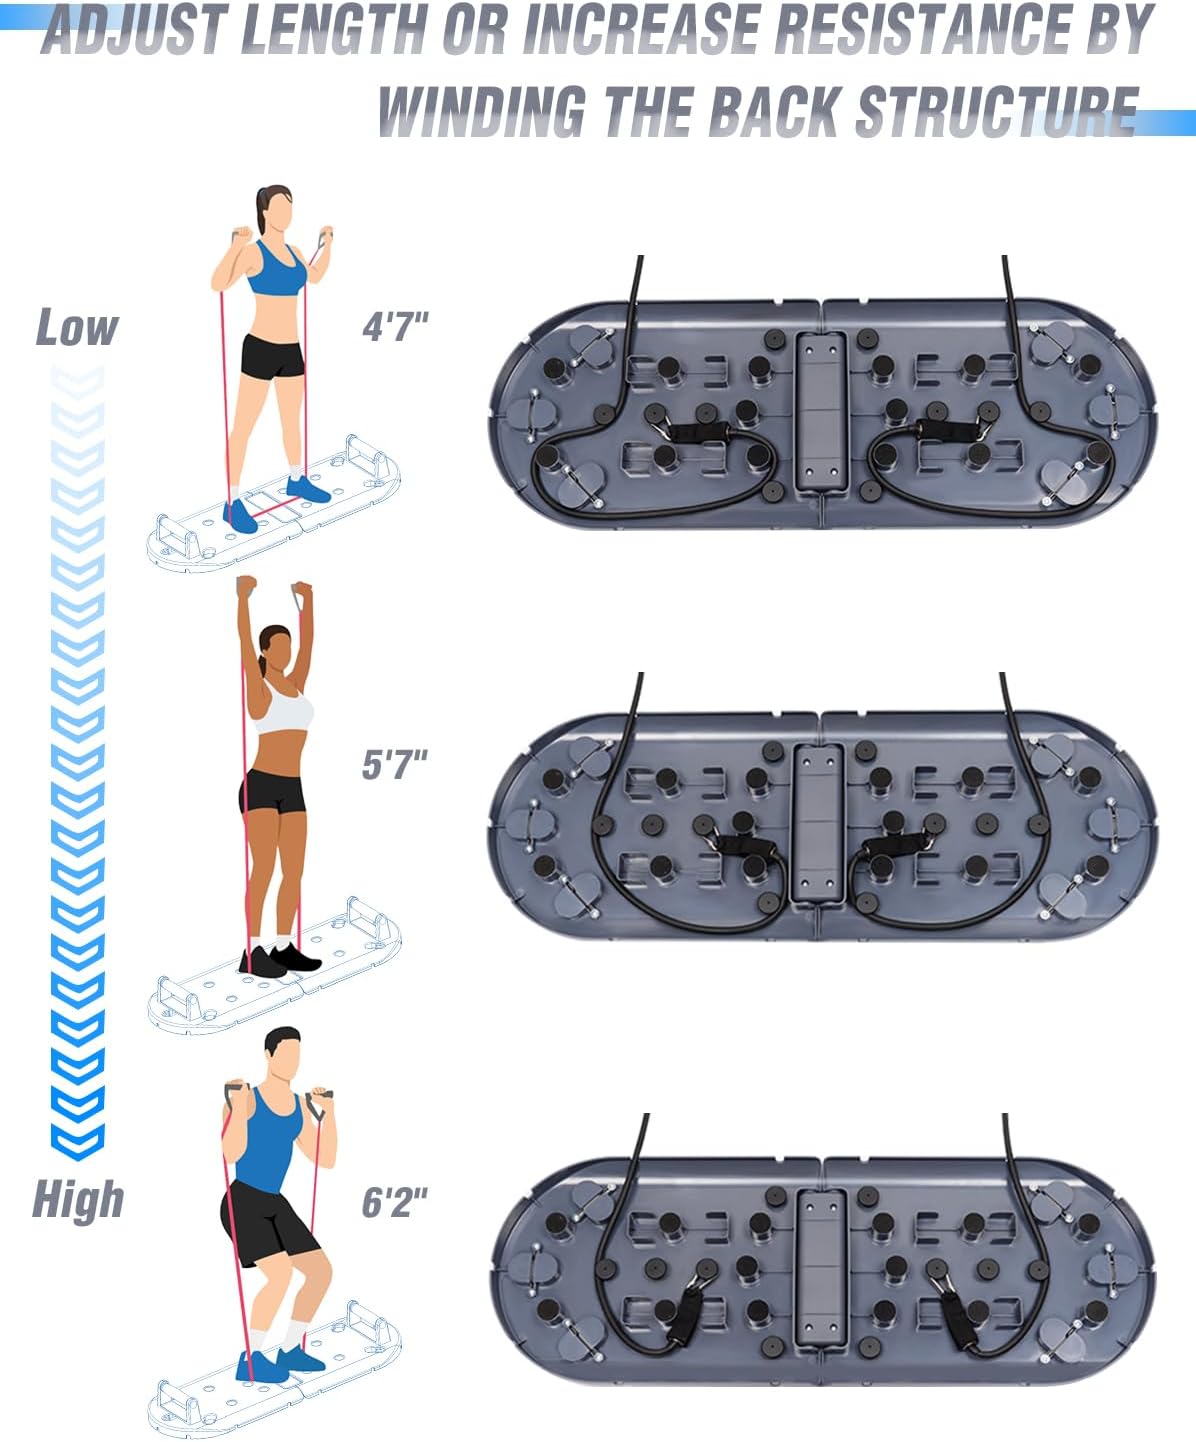 Hikeen Home Workout Equipment to Help Achieve Fitness Goals, 27-in-1 Portable Gym Exercise Equipment with Compact Push-Up Board, Resistance Bands, Ab Roller Wheel, and Pilates Bar, Master Your Workout